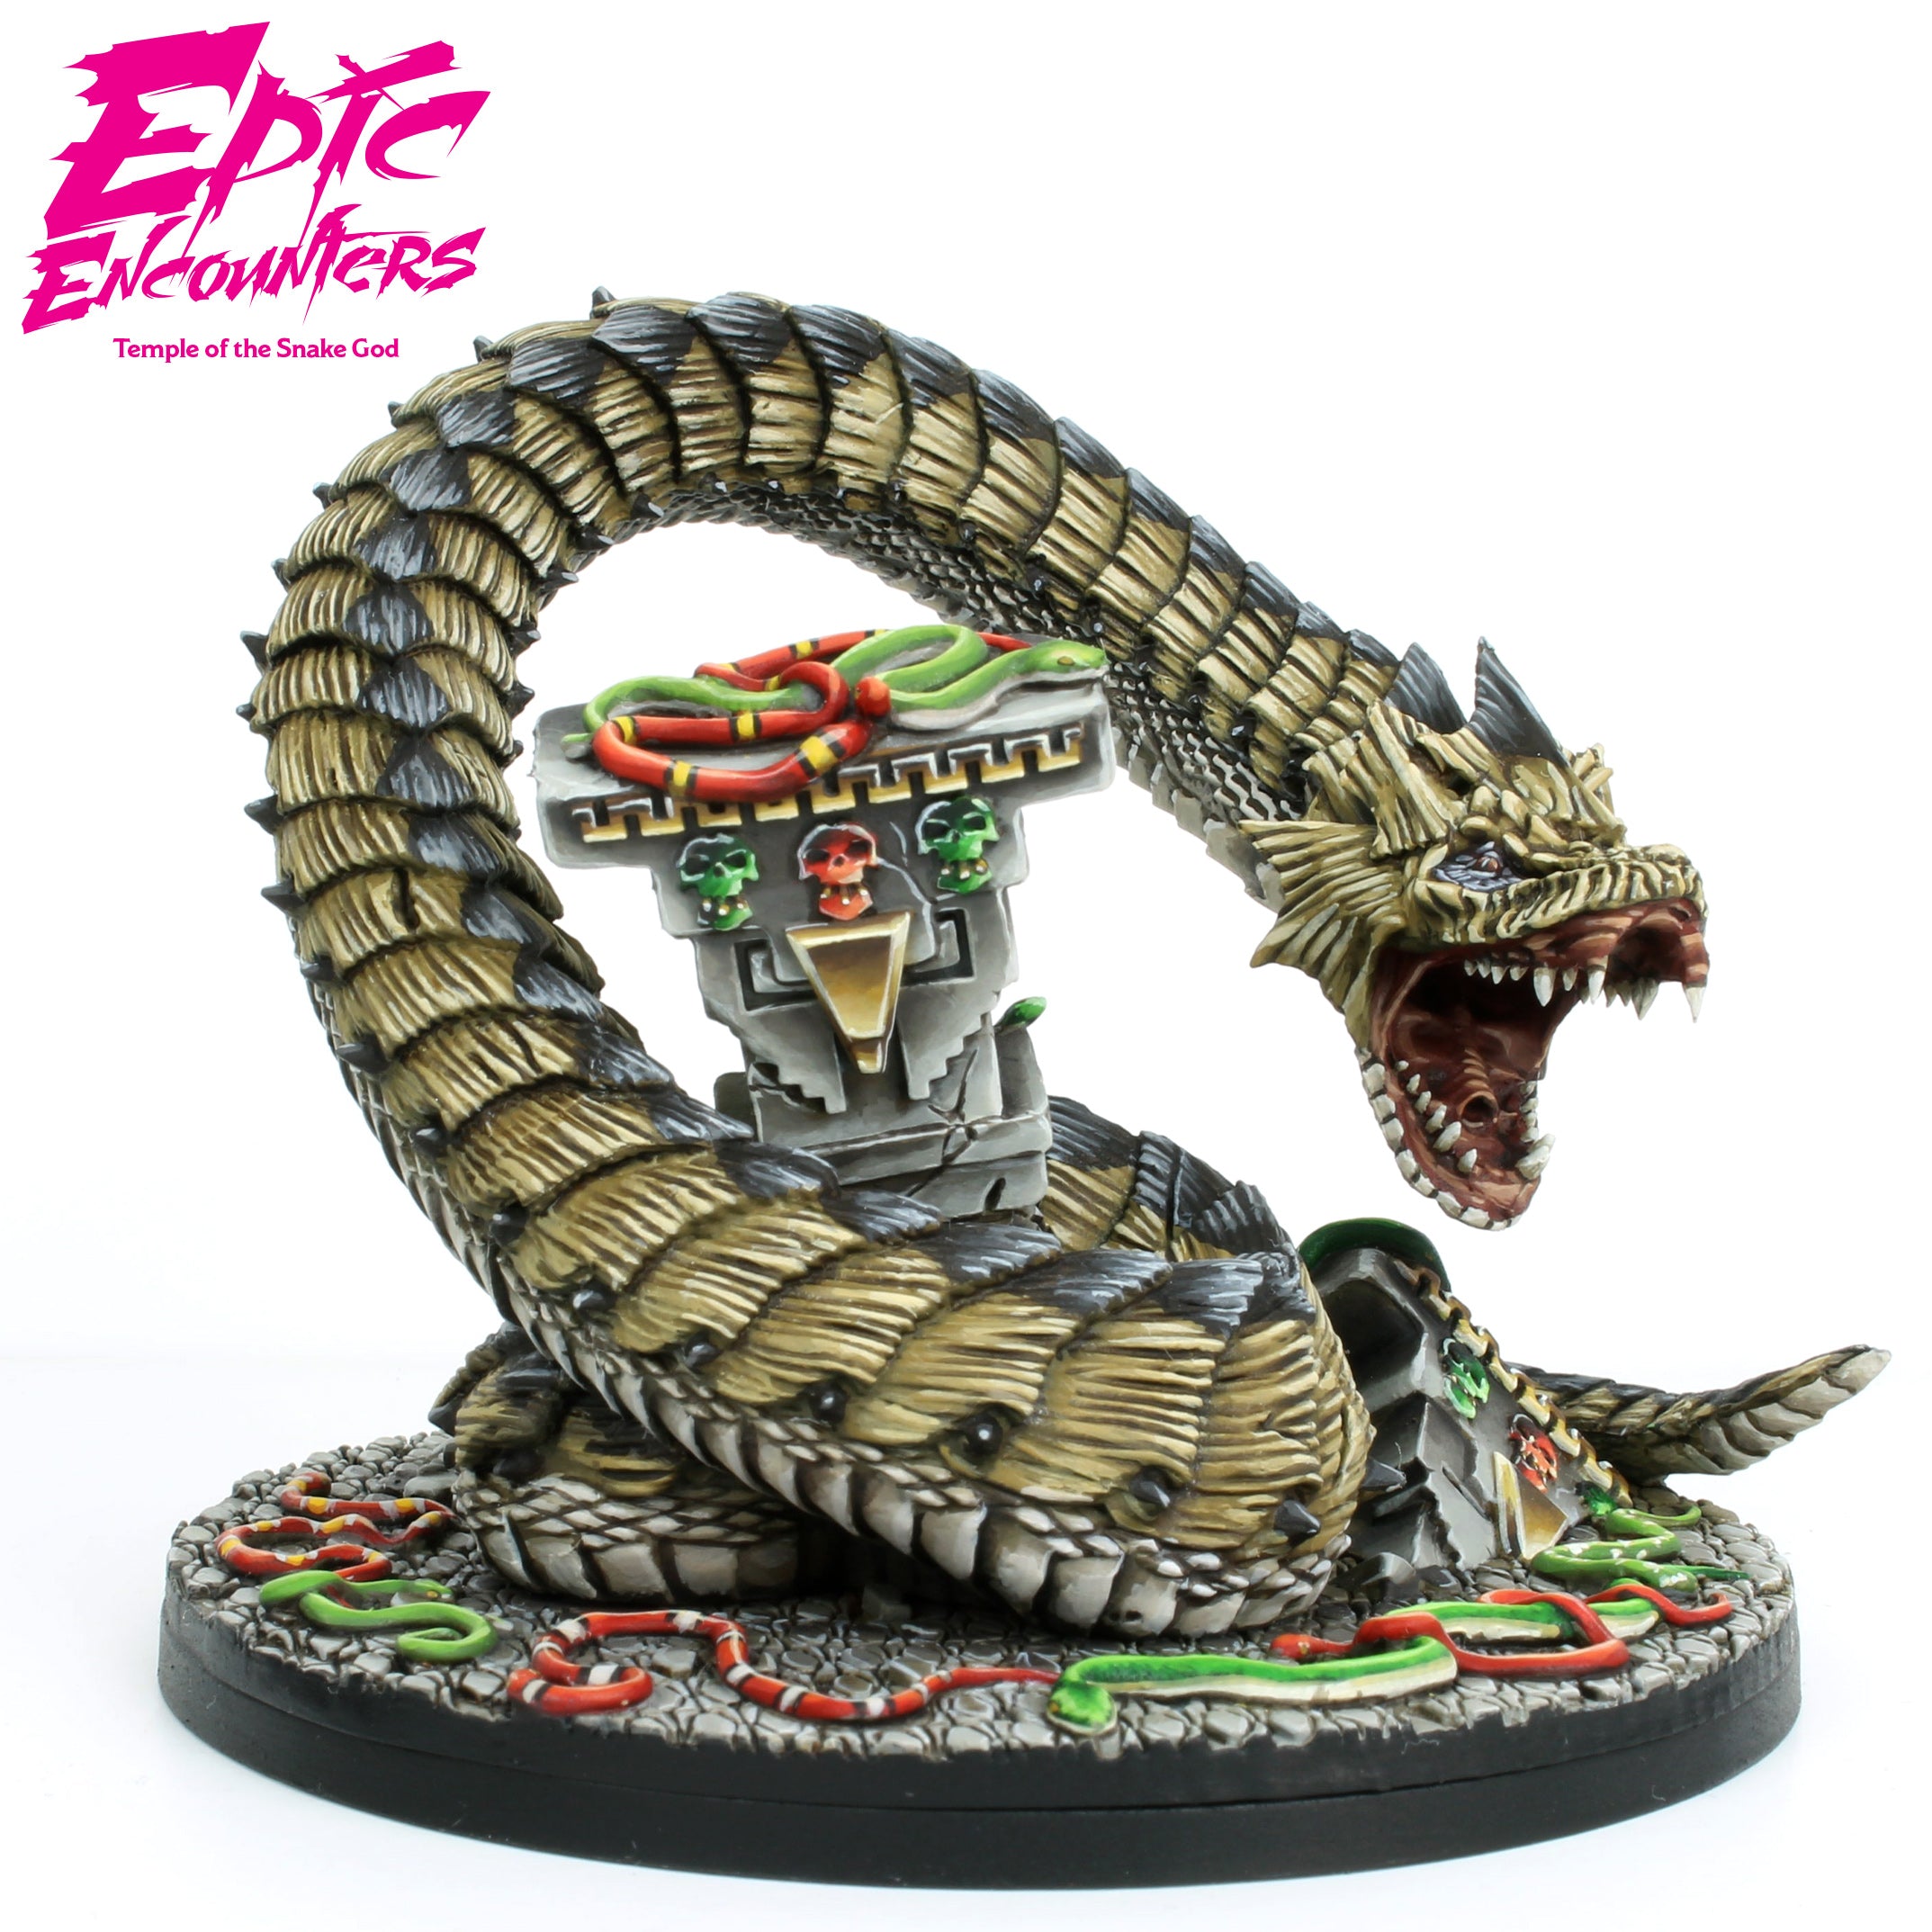 Epic-Encounters-Painted-Giant-Snake